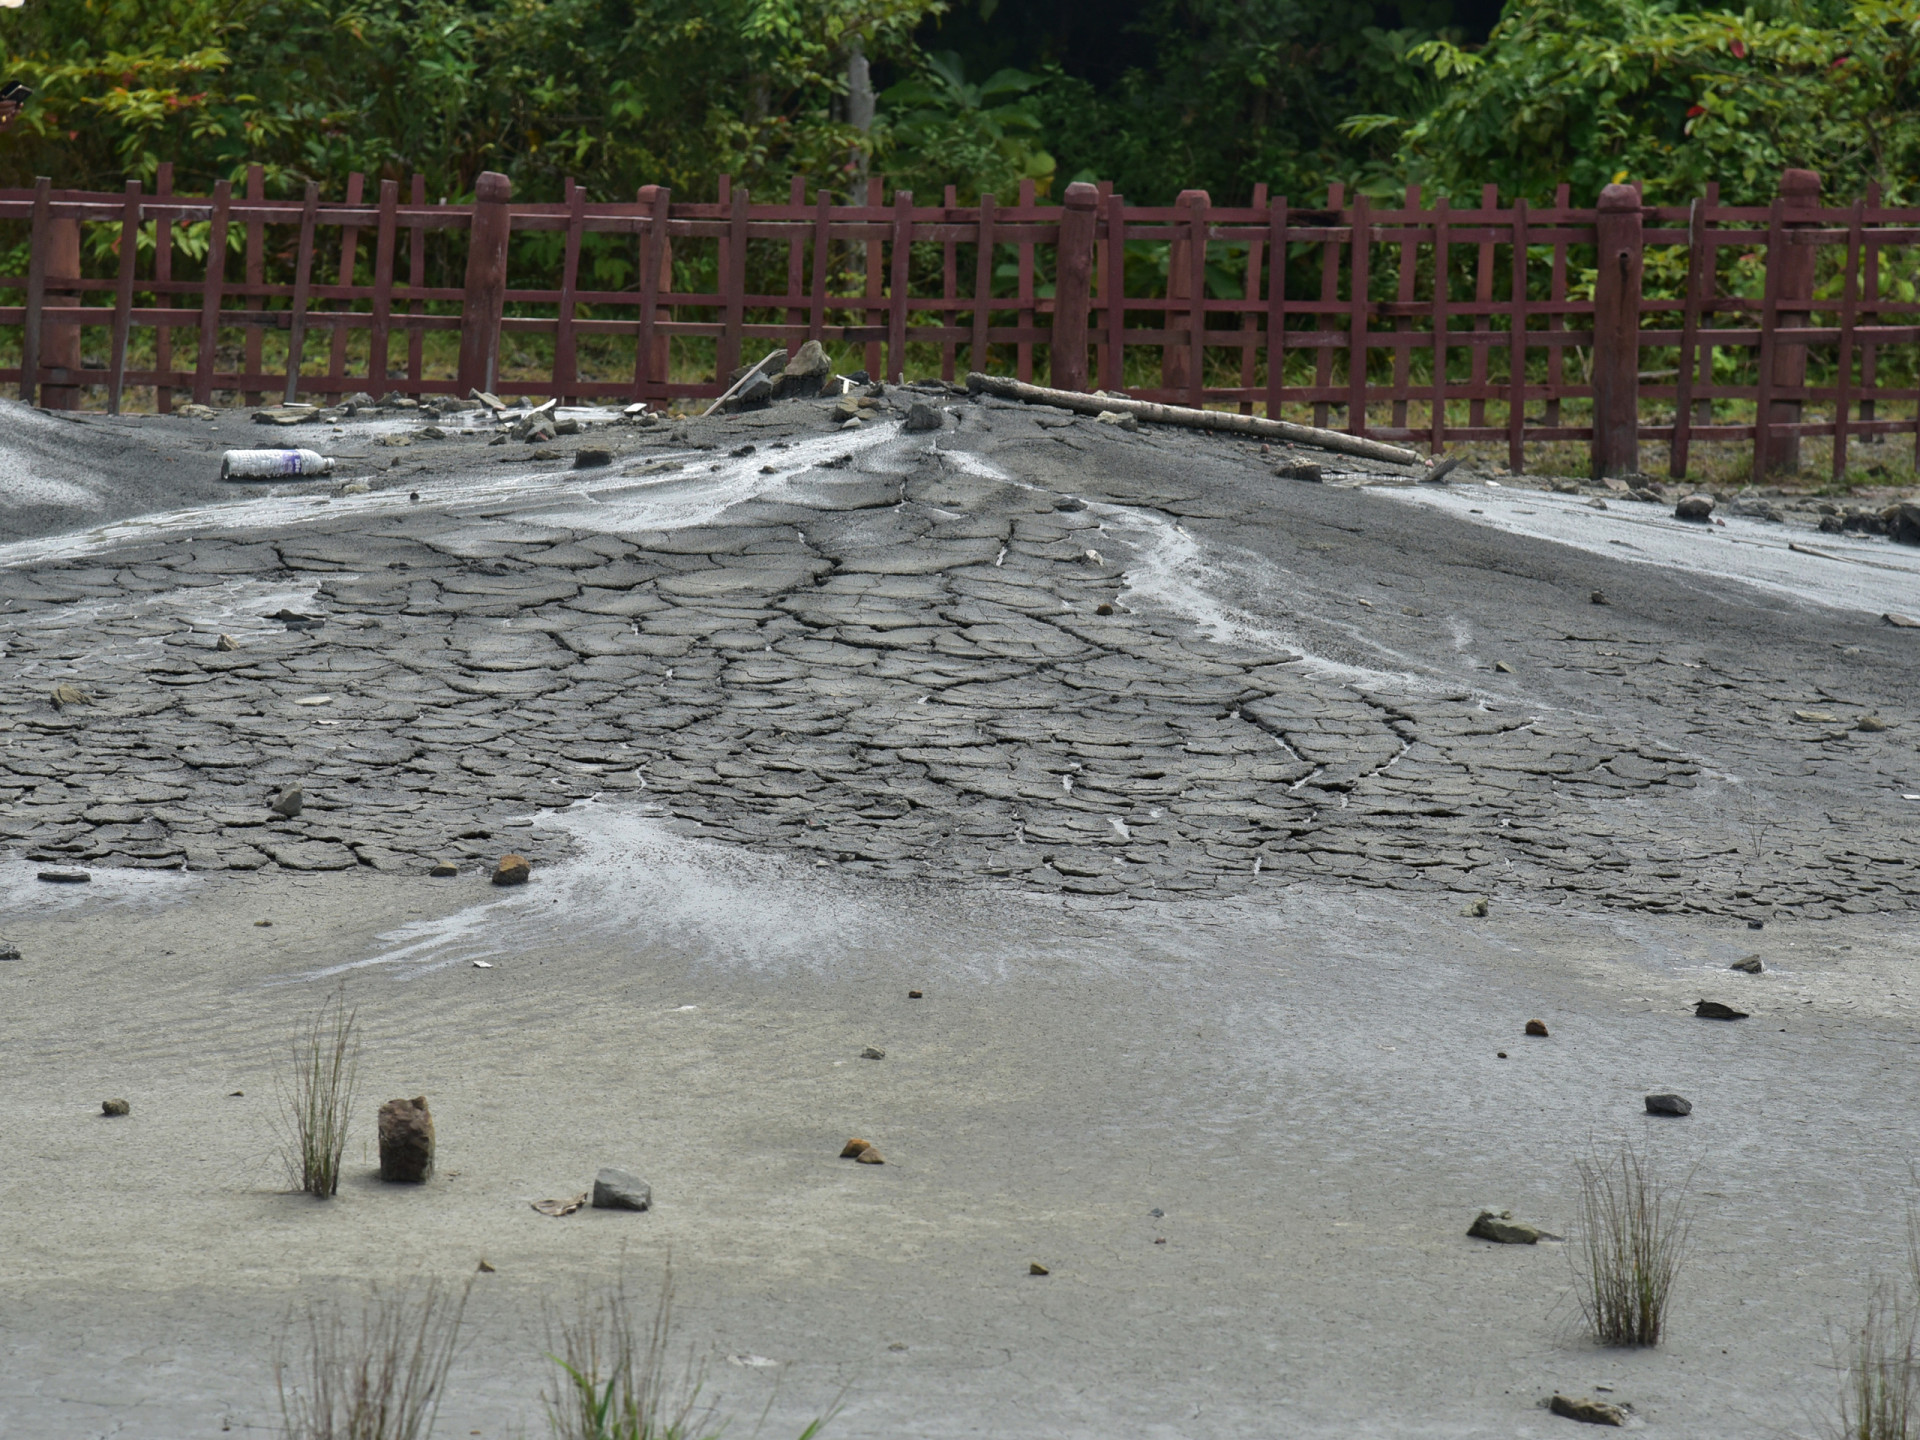 <p>Baratang, which belongs to the Great Andaman Chain, contains the only known examples of mud volcanoes in India.</p><p>You may also like:<a href="https://www.starsinsider.com/n/491014?utm_source=msn.com&utm_medium=display&utm_campaign=referral_description&utm_content=689154en-my"> History's most bizarre curses</a></p>